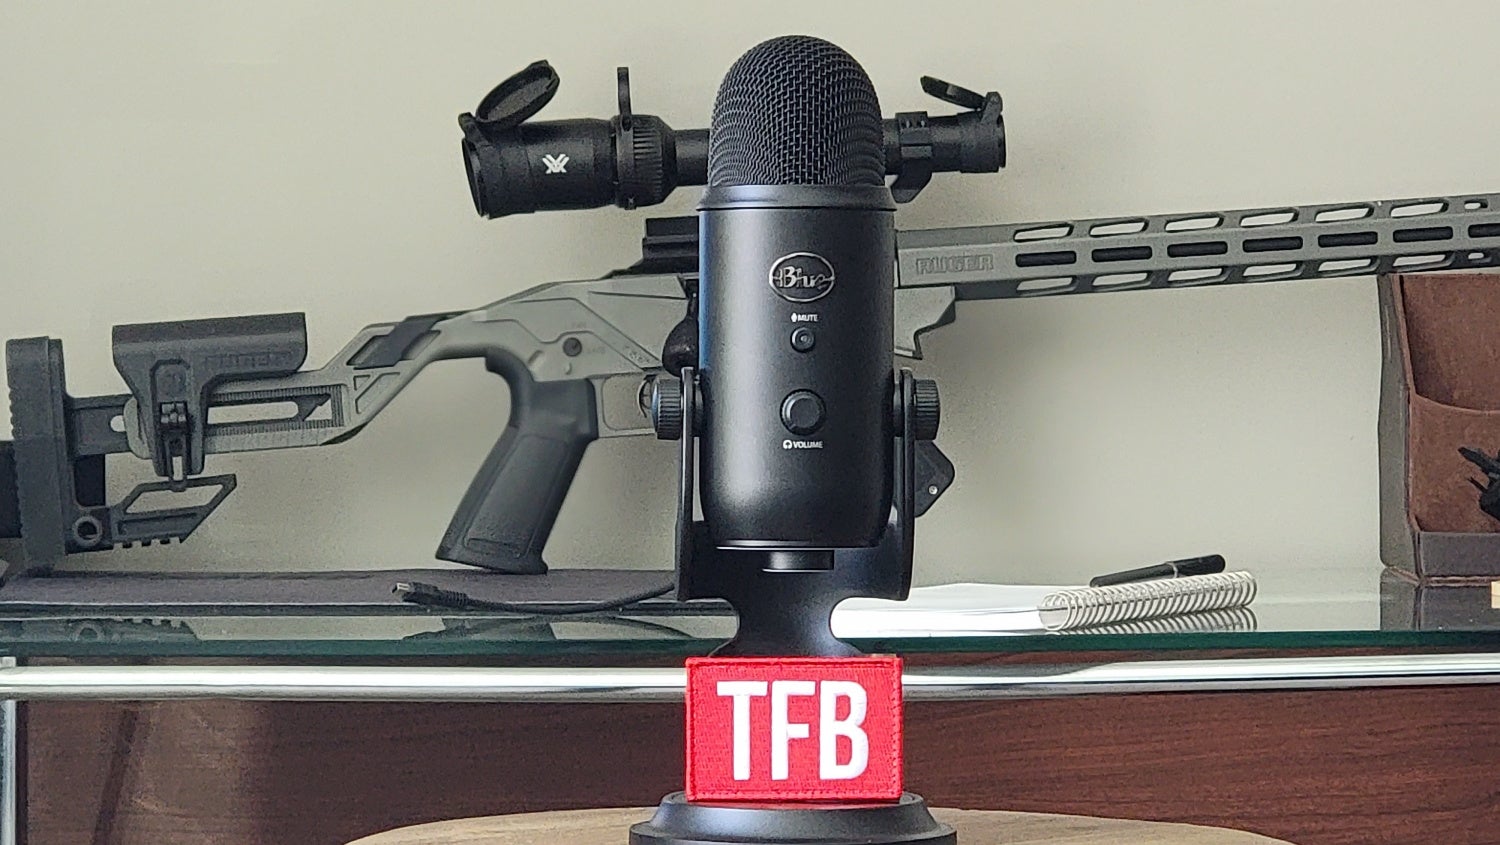 TFB Podcast Roundup 57: Heavy Hitting Guests and CCW Guns